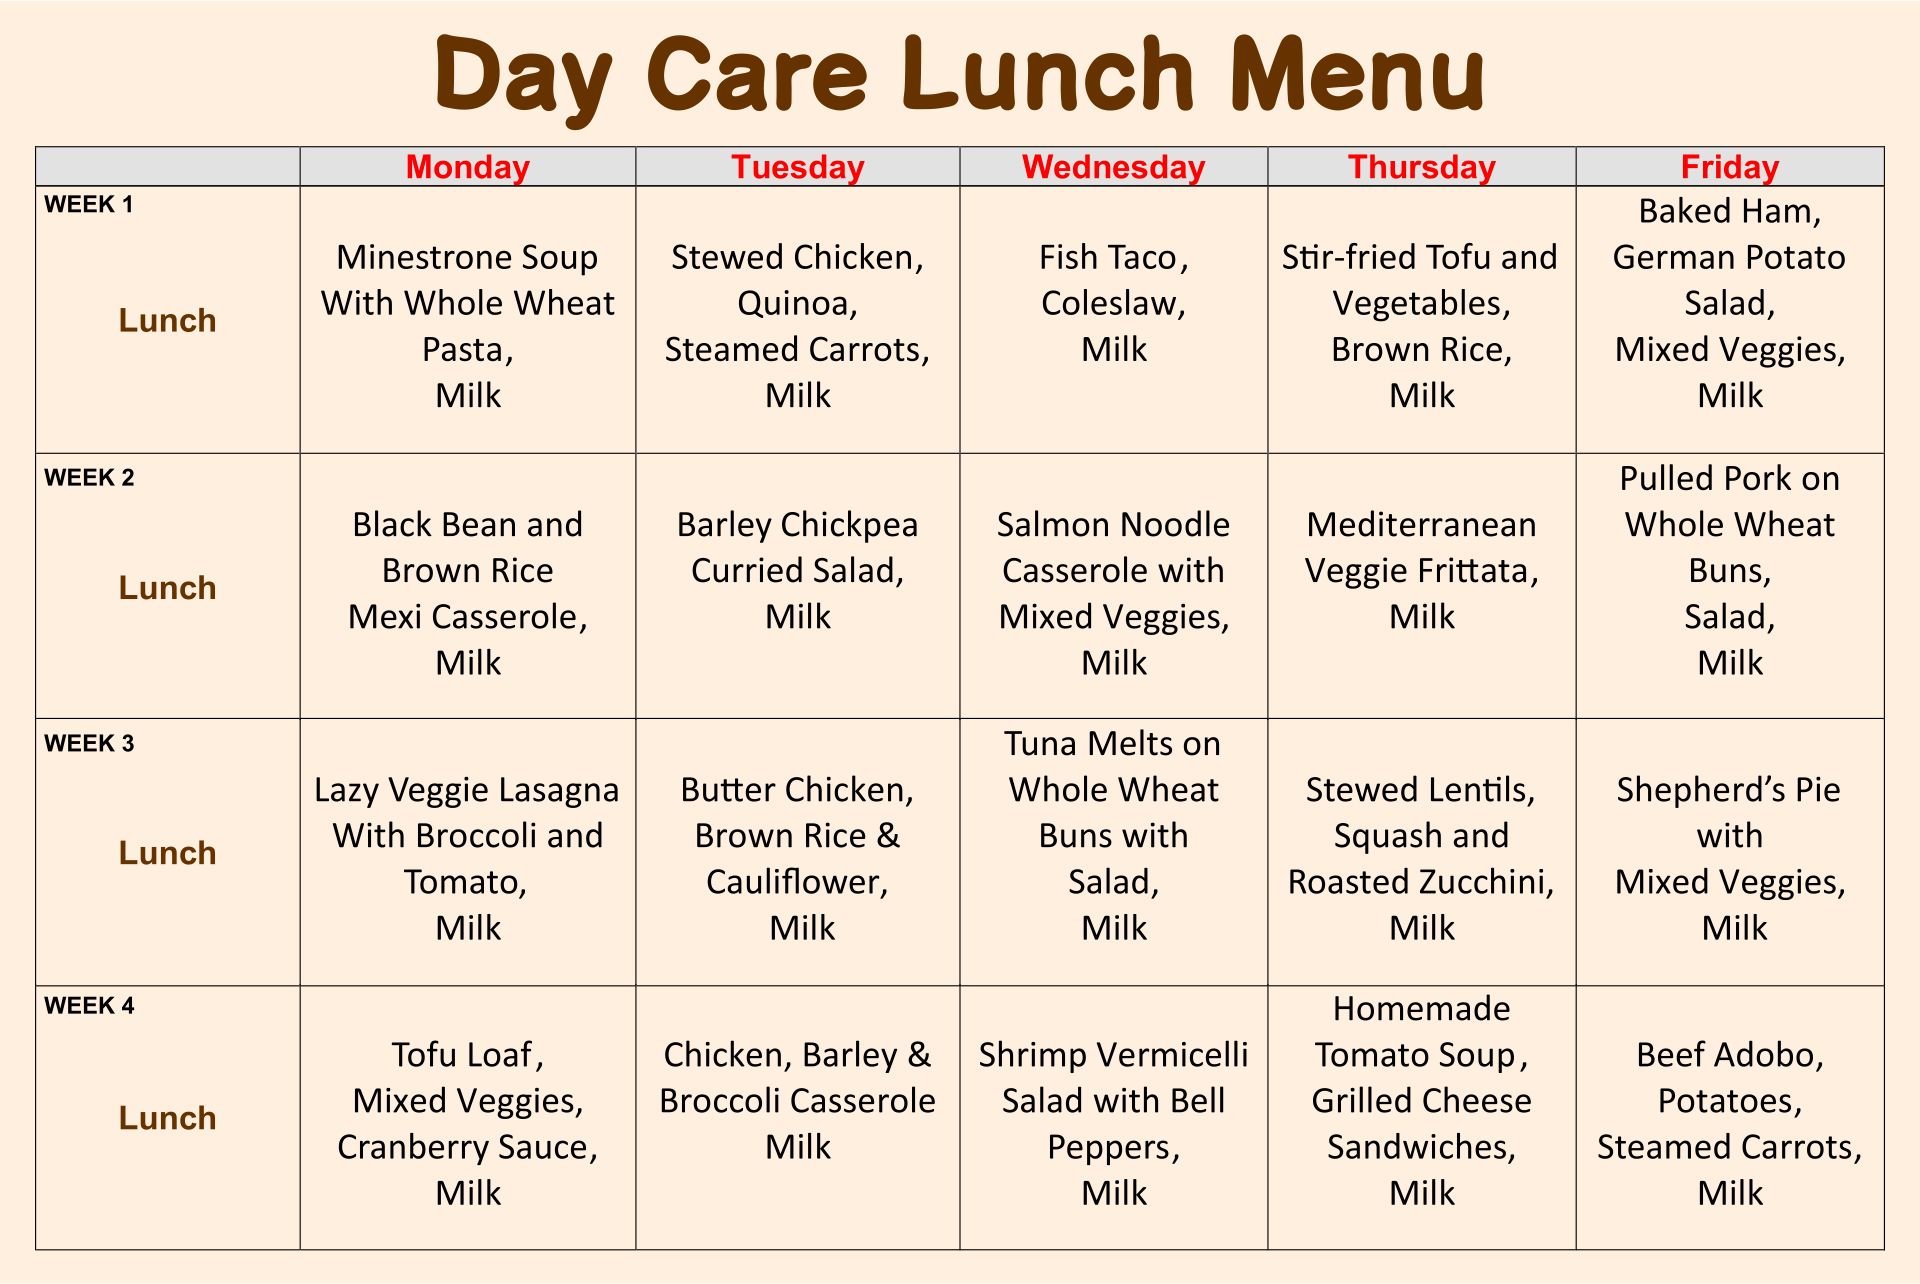 free childcare menu template download word